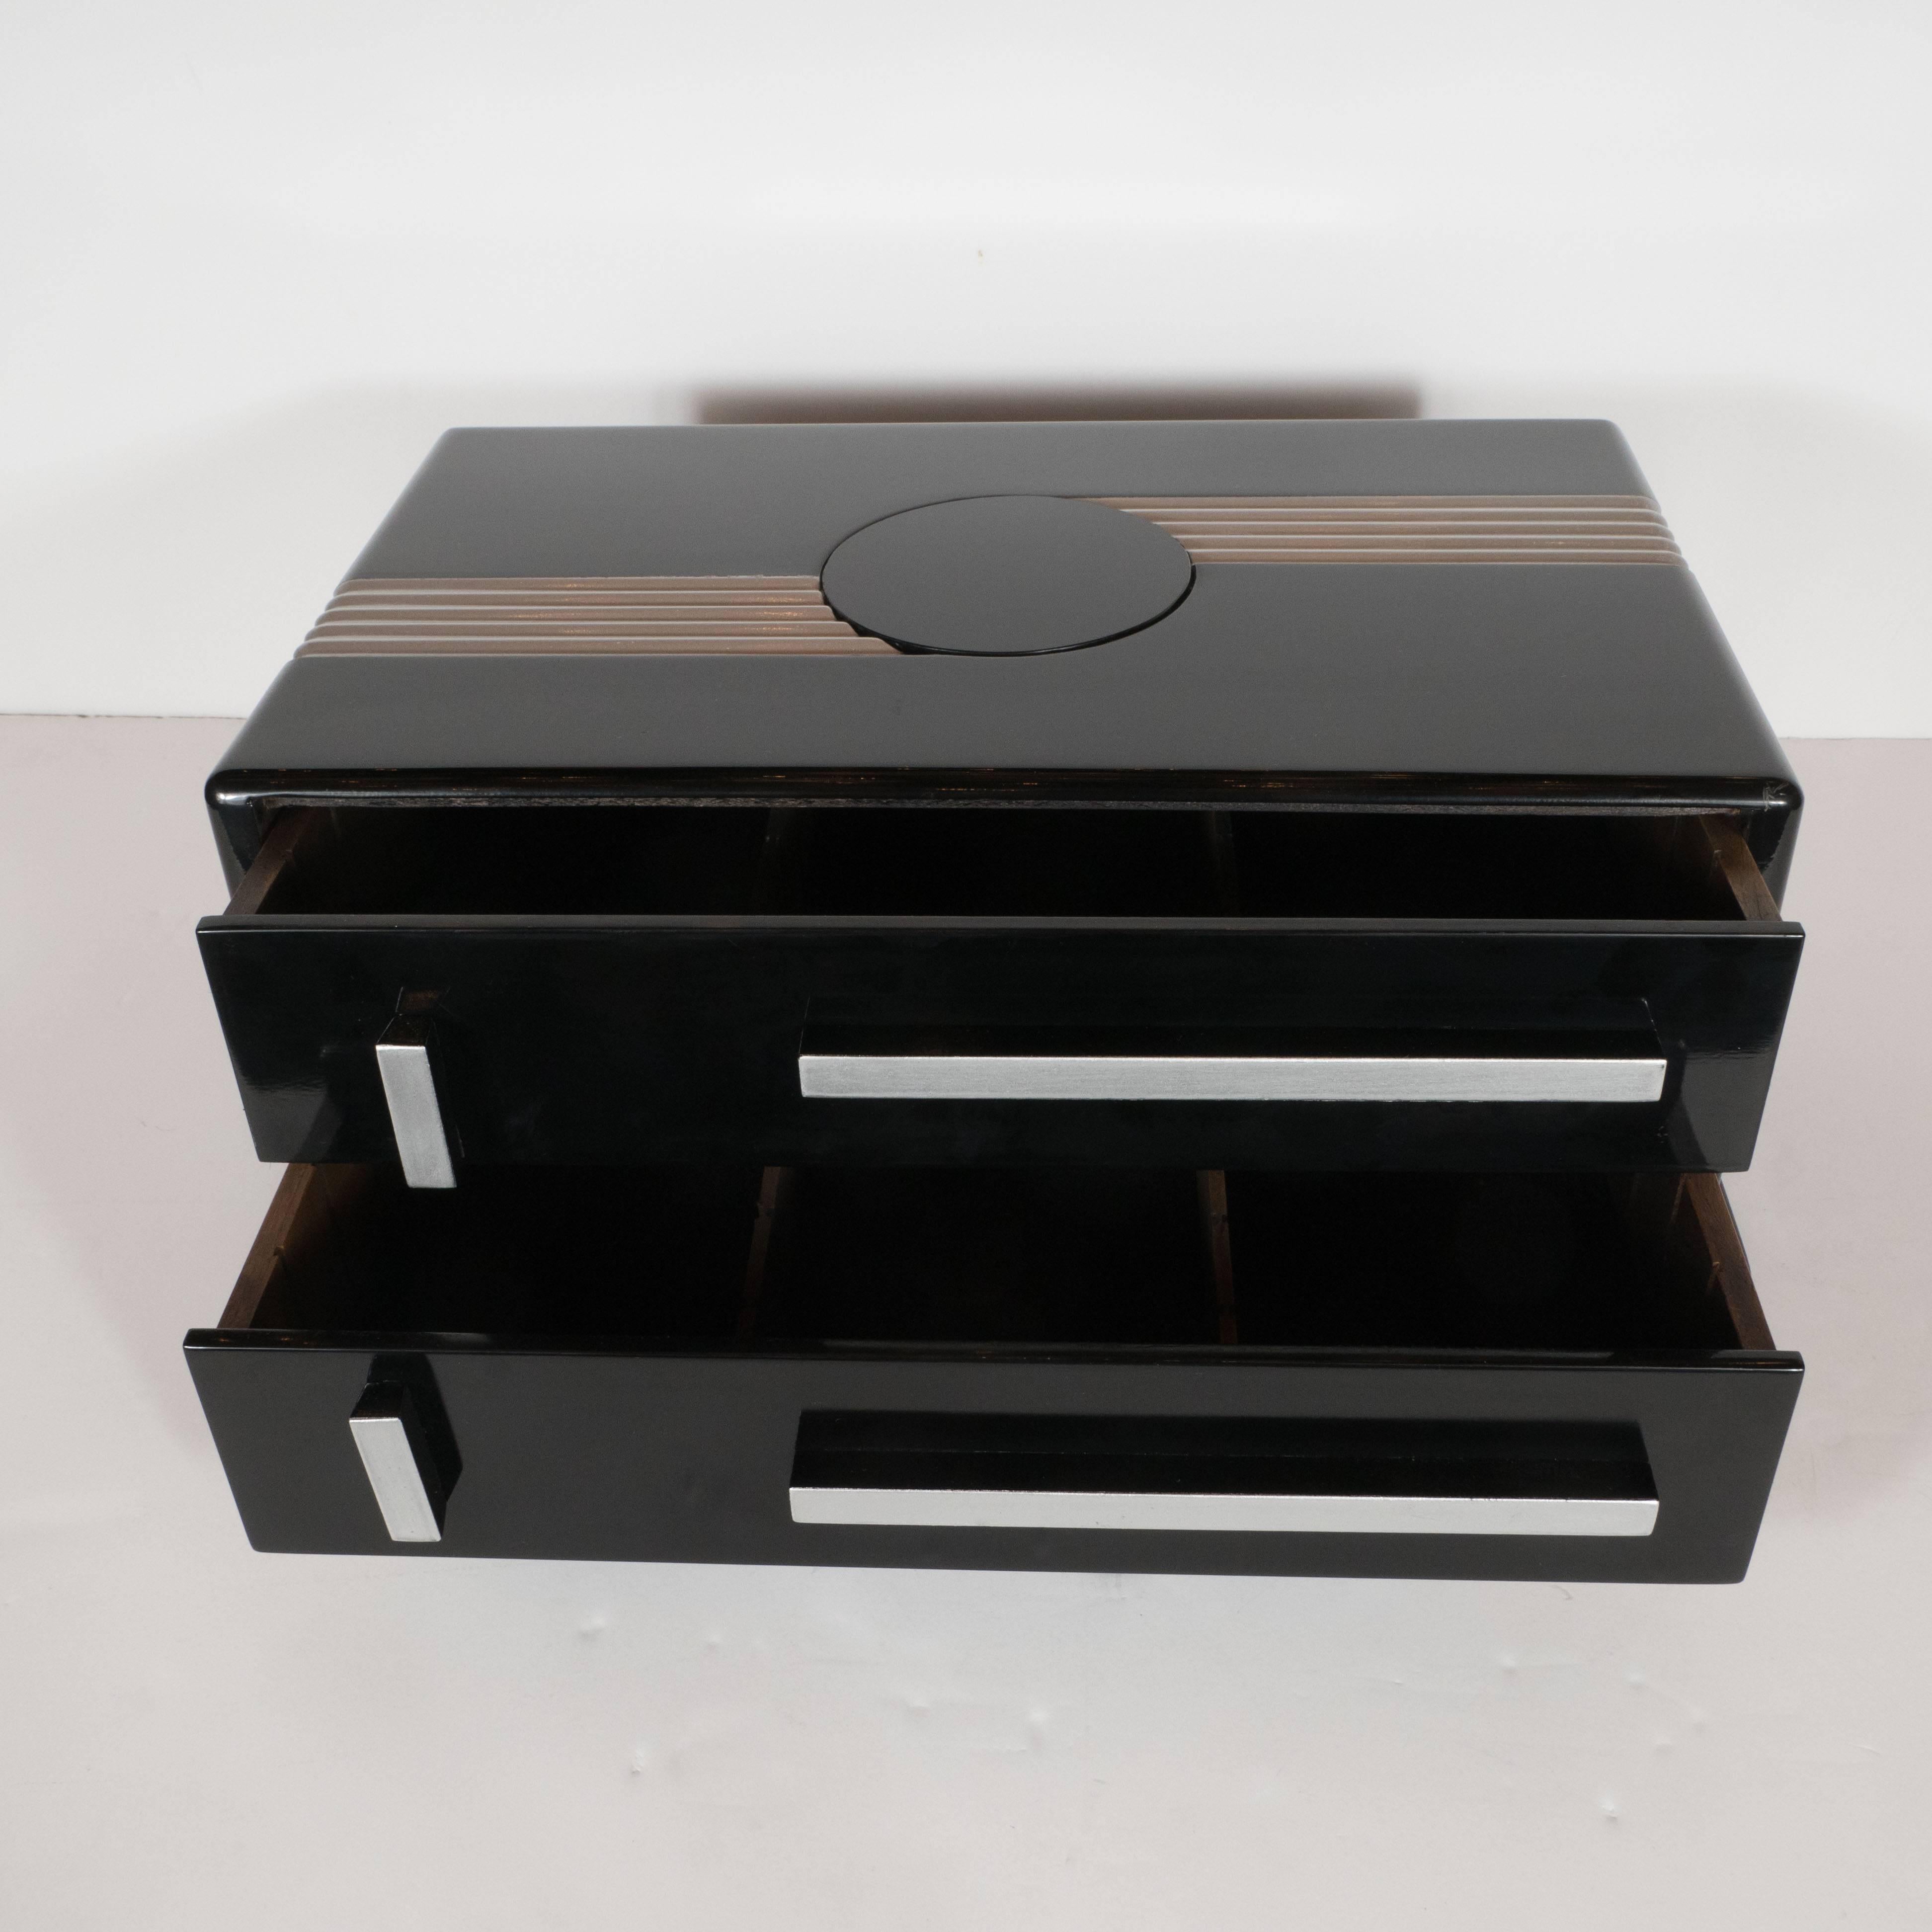 Streamlined Art Deco Jewelry Box in Black Lacquer with White Gold Finishes 1